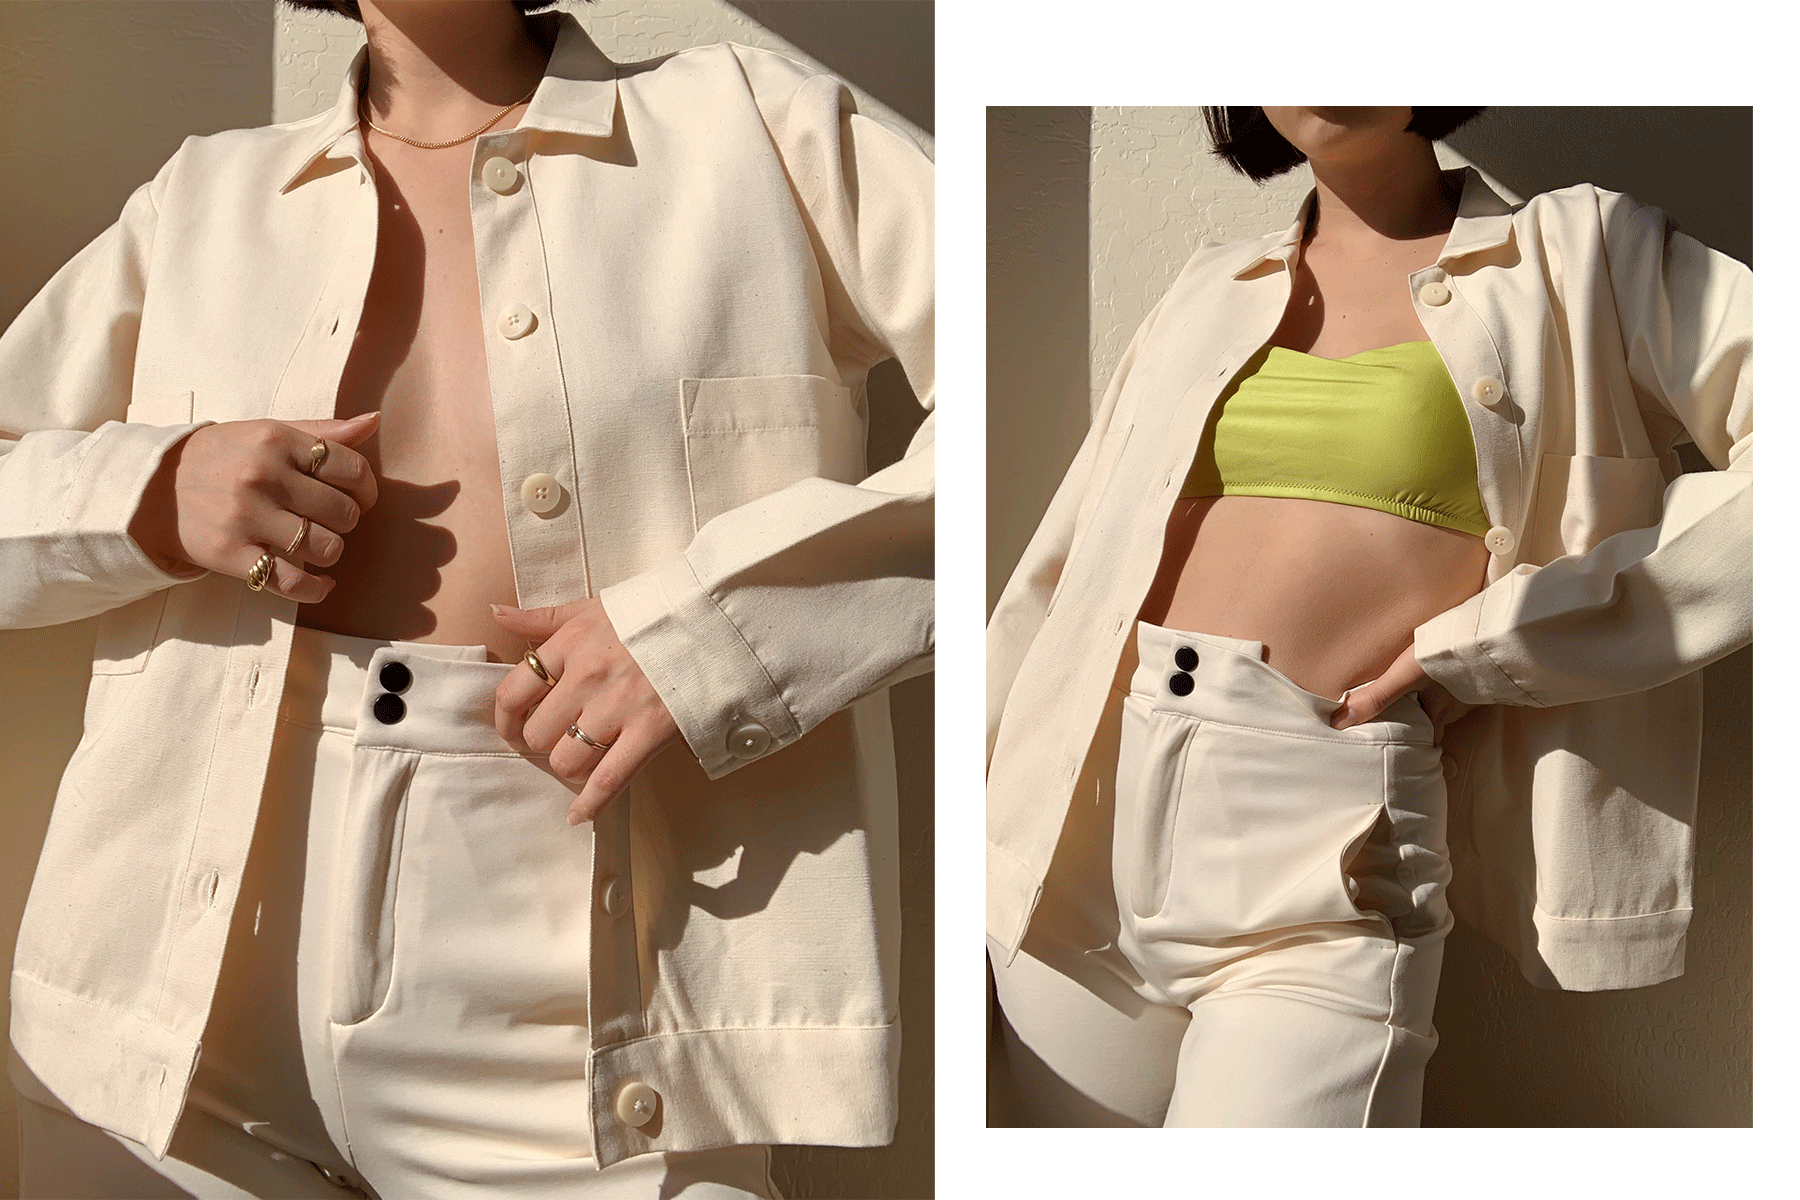 Gabby poses in our hore jacket. She is matching the natural look with another brands natural pants. The chore jacket is open and exposing her skin in a beatuiful but not revealing way. On the right, it's the same but with a neon green bra on.